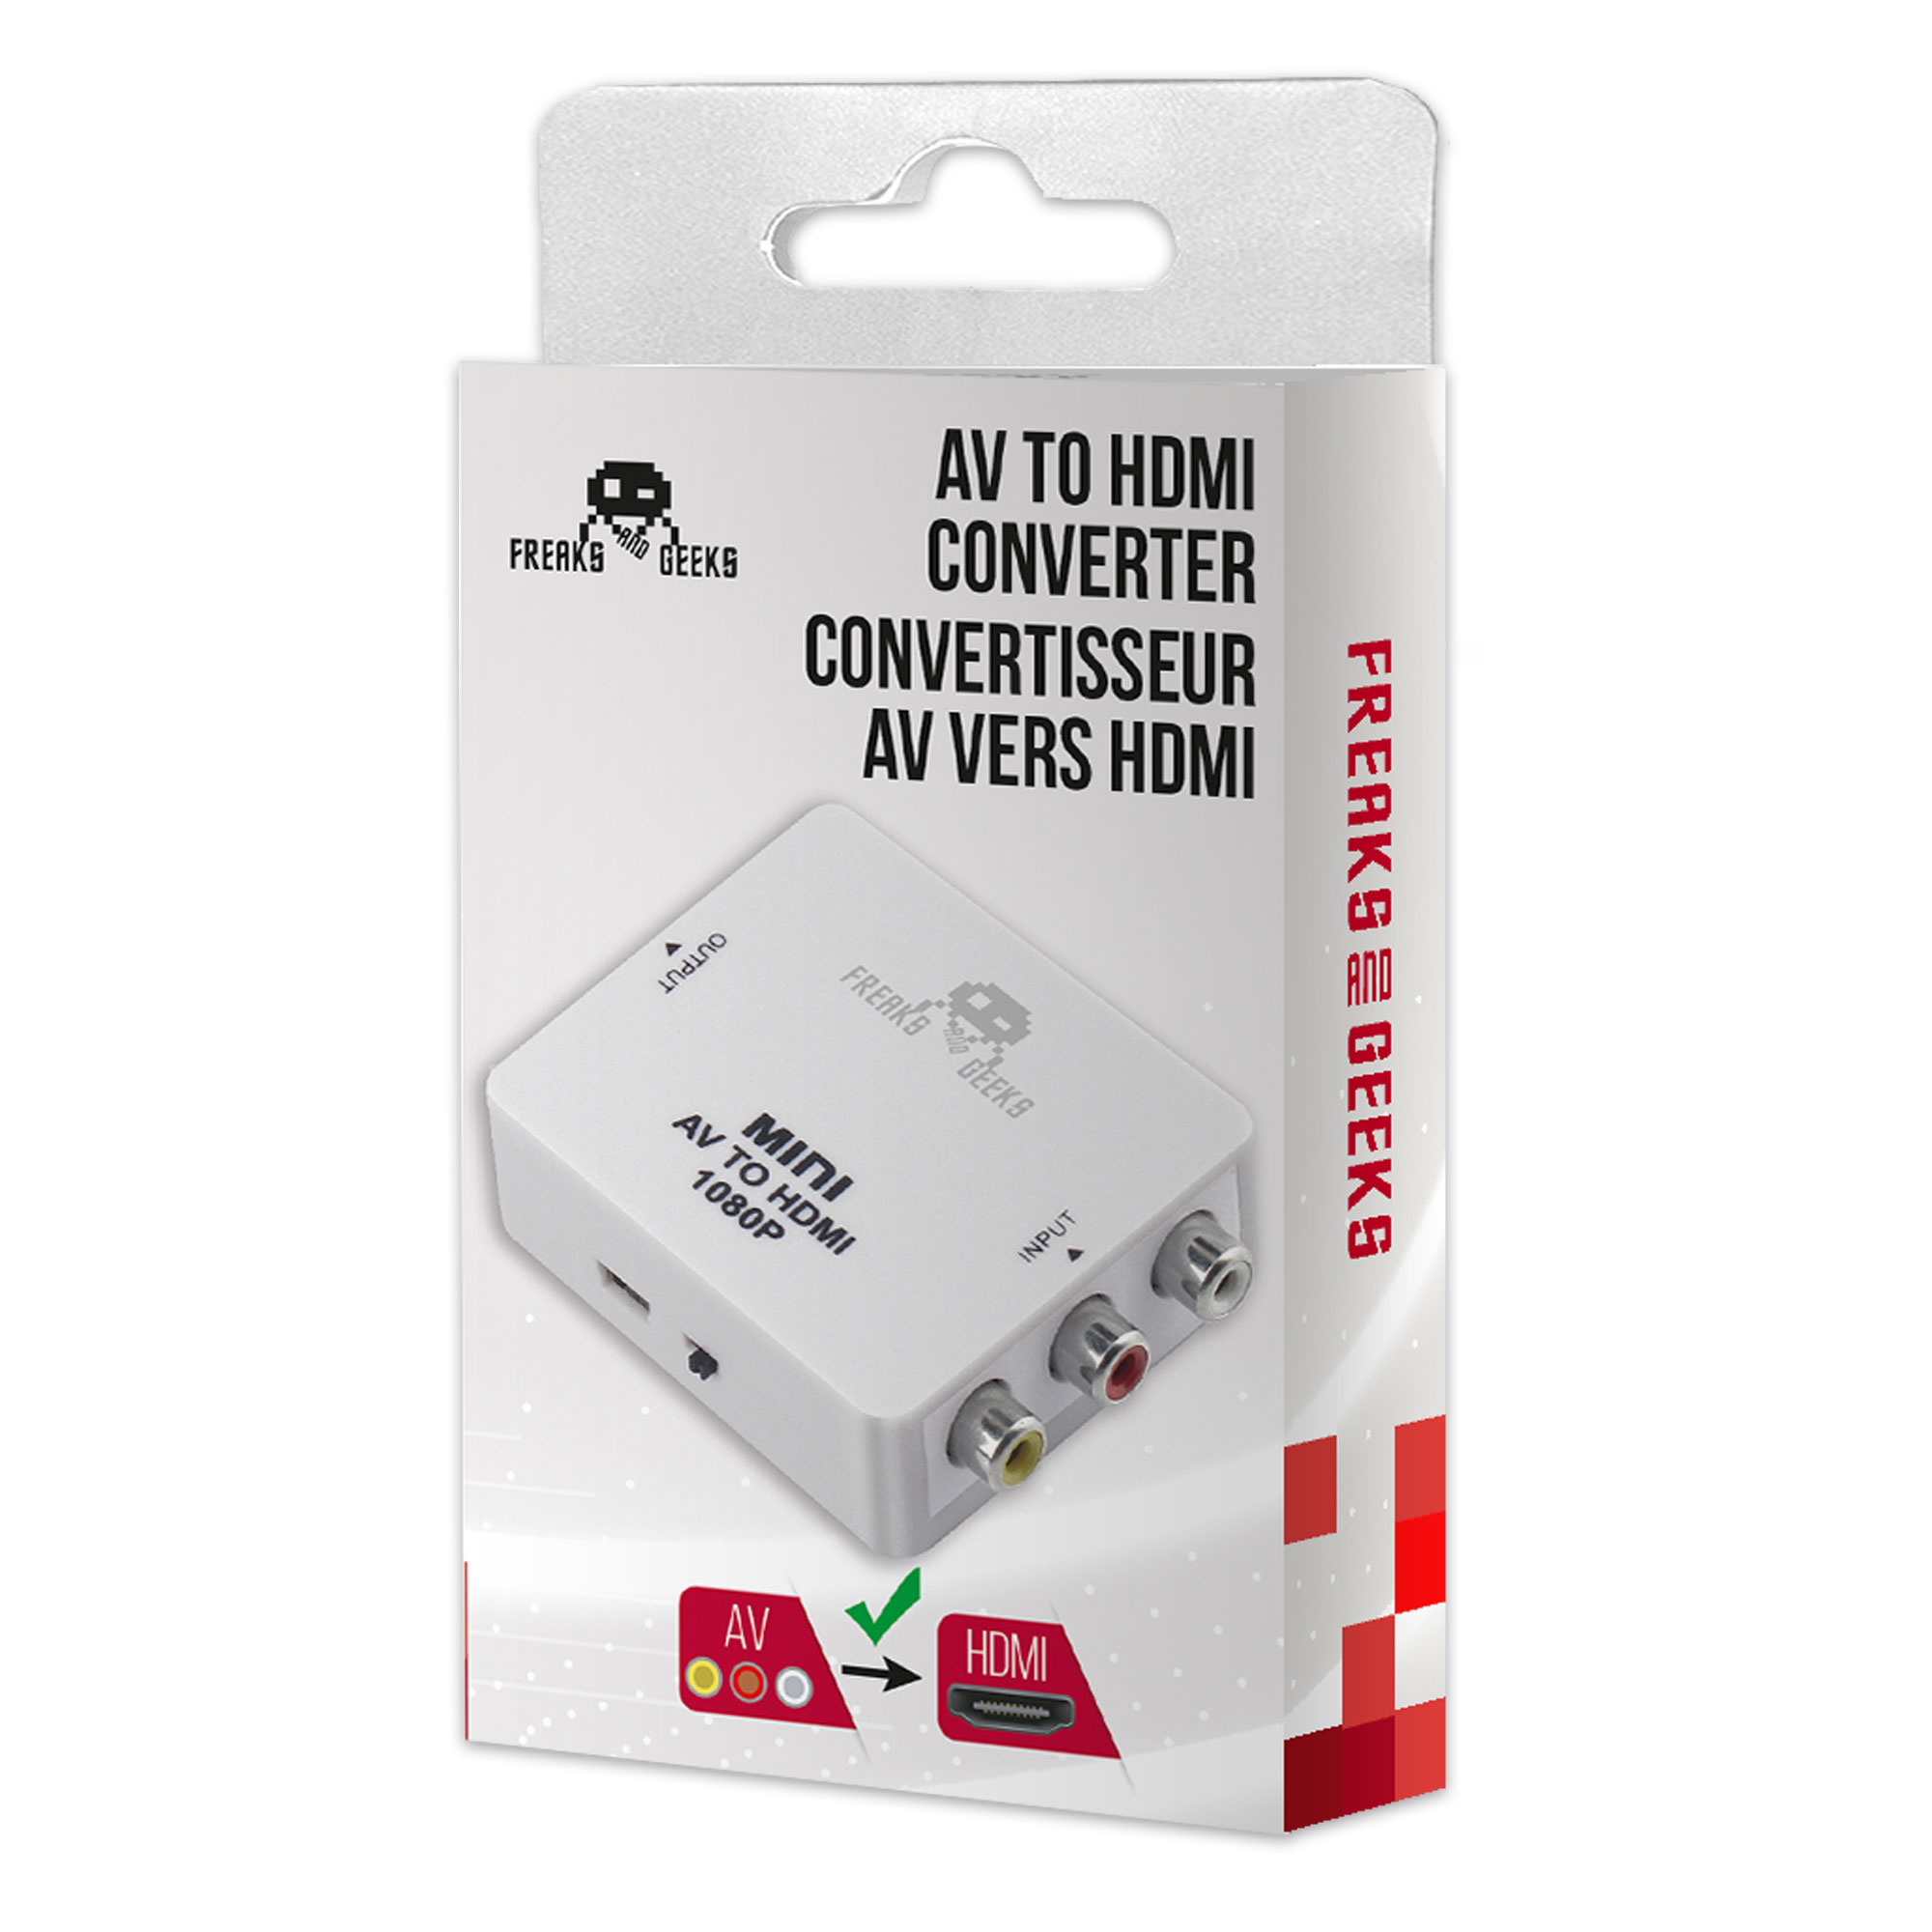 AV Vers HDMI: Convertisseur HDMI pour SNES, MegaDrive, Wii, Game Cube -  Freaks and Geeks